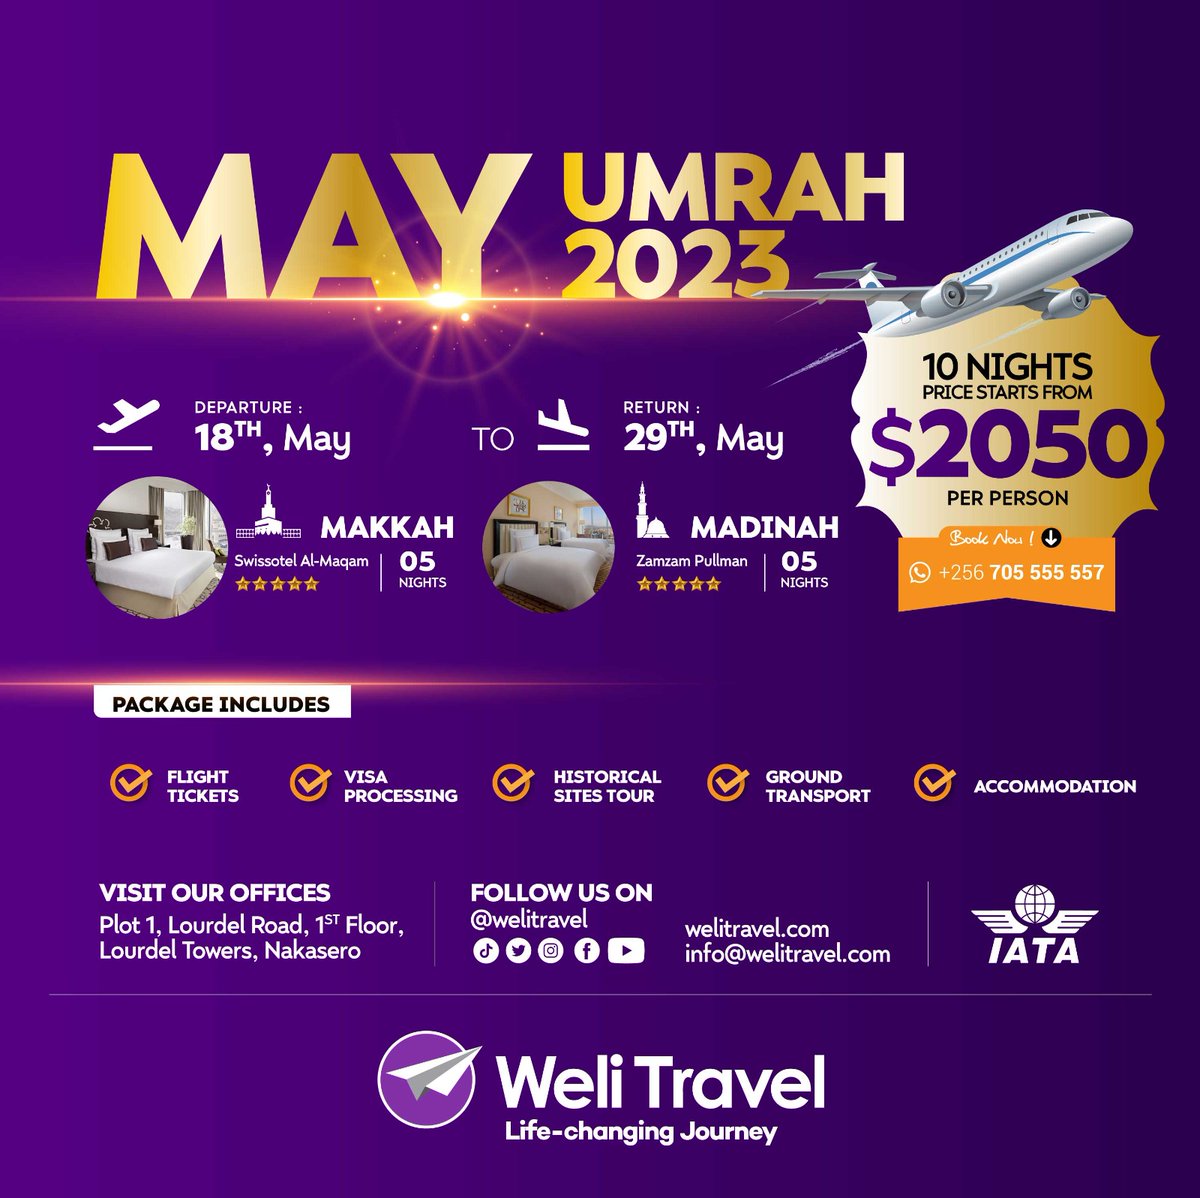 AD: Experience the ultimate spiritual retreat with Weli Travel's May Umrah package, featuring everything you need for a hassle-free journey to Makkah and Madinah at USD 2,050.
#welitravel #lifechangingjourney

@welitravel